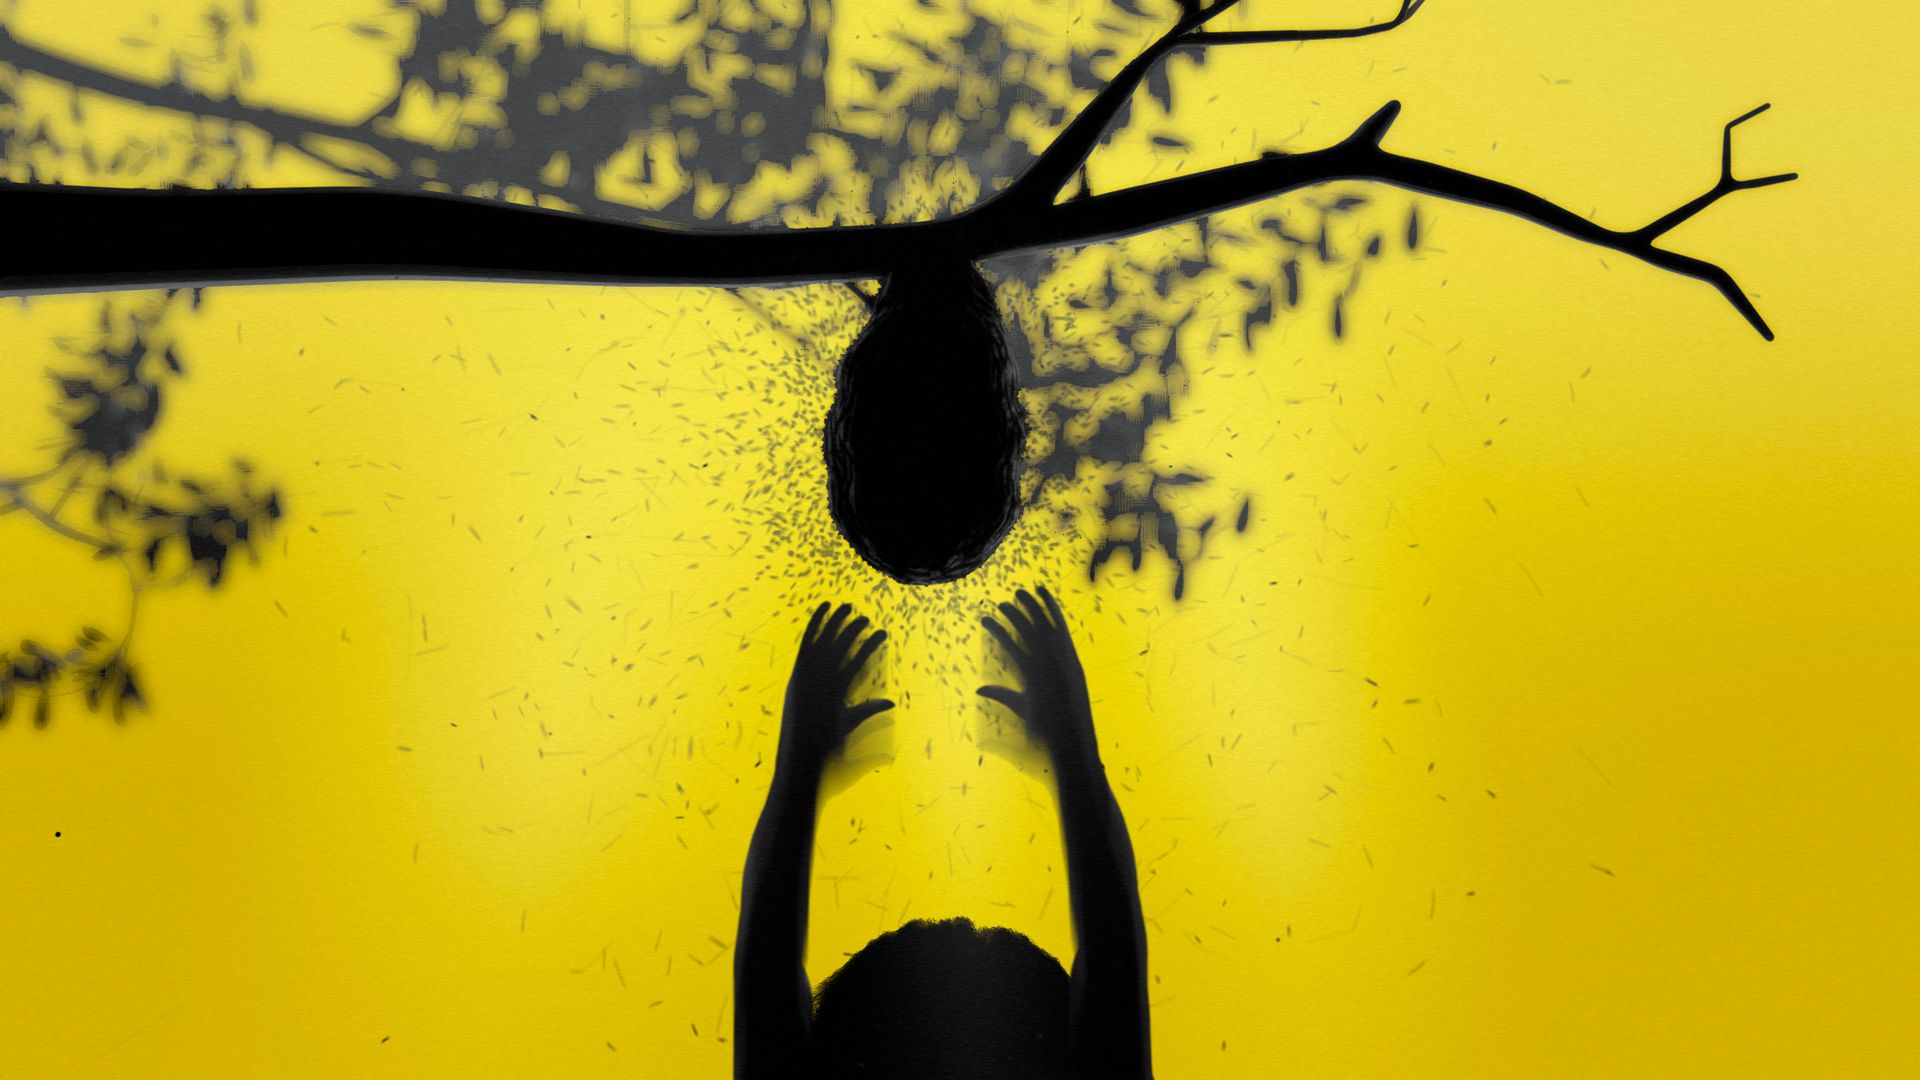 Silhouette of person reaching up to grab a buzzing bee hive from a branch